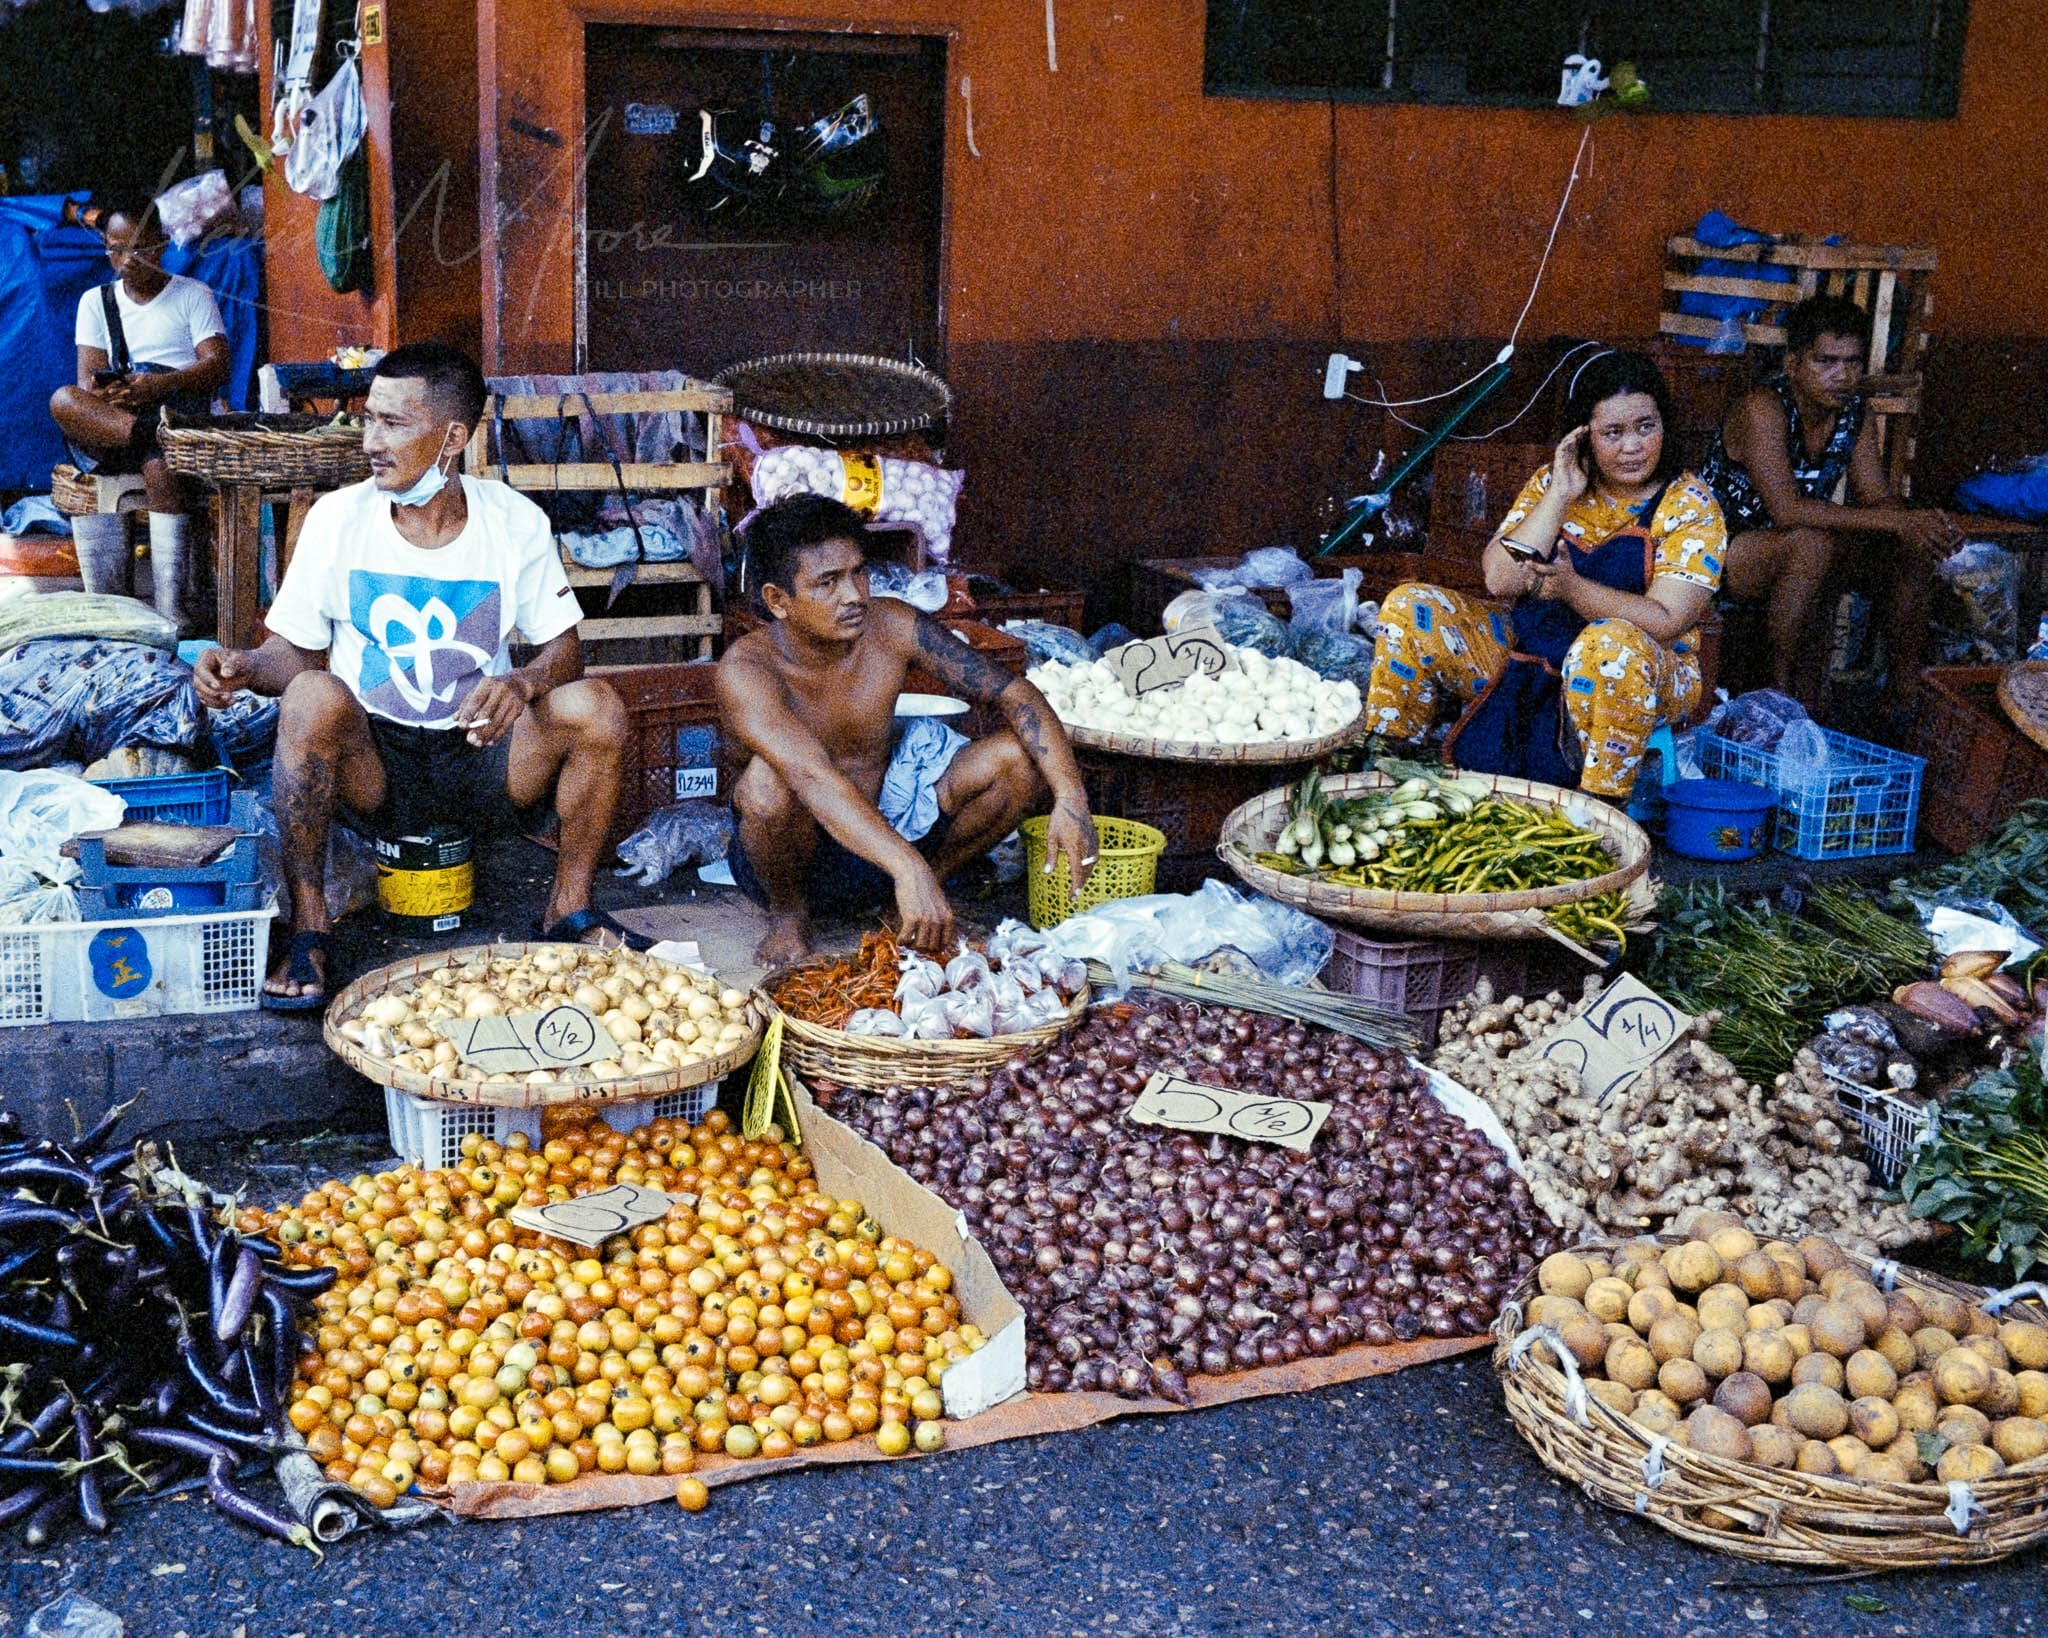 Local vendors at a vibrant, tropical street market selling fresh, colorful fruits and vegetables.